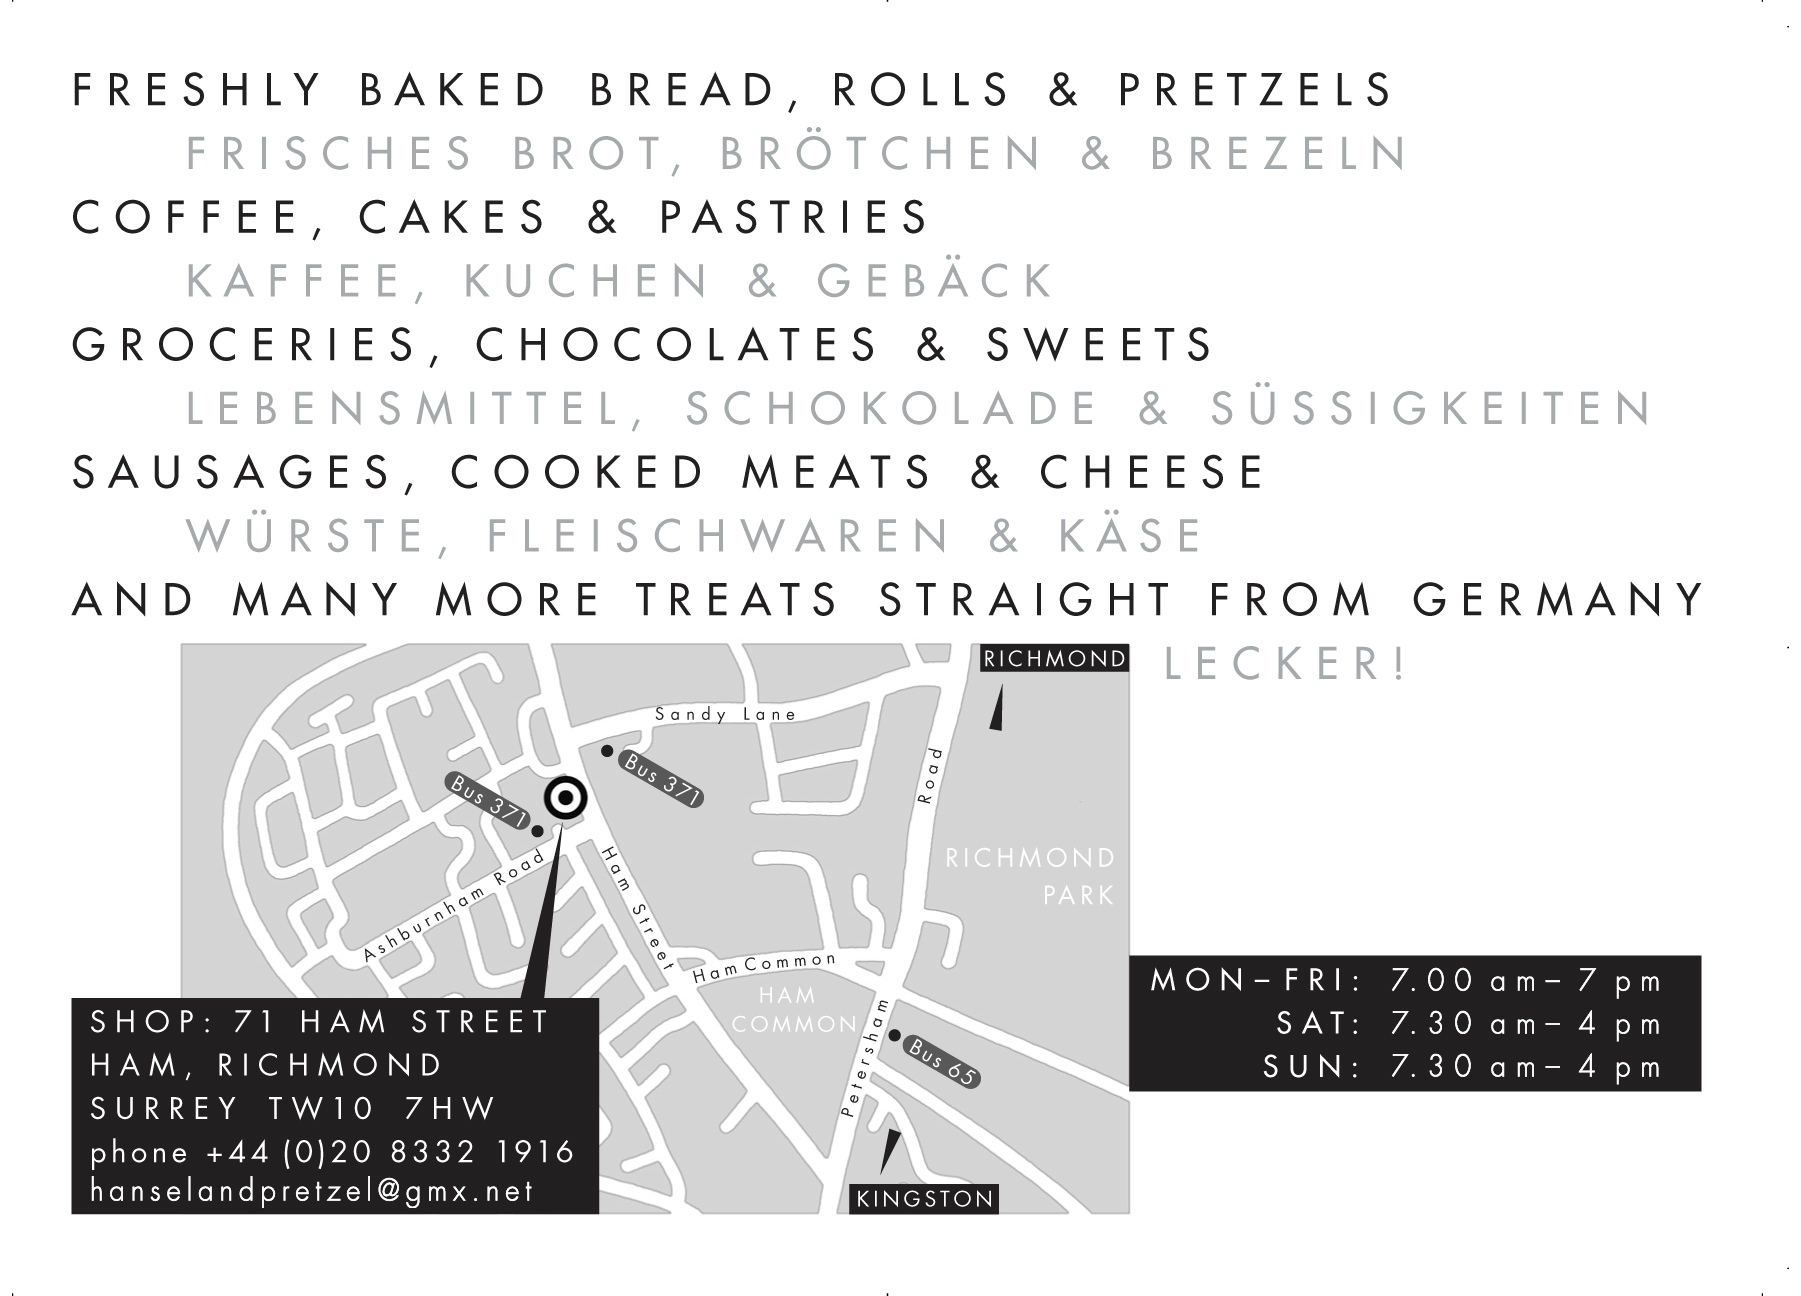 Freshly baked bread, rolls and pretzels. Coffee, cakes and pastries. Groceries, chocolates and sweets. Sausages, cooked meats and cheese. And many more treats straight from Germany. Hansel and Pretzel, 71 Ham Street, Ham - Richmond, TW10 7HW, Tel 020 8332 1916. Open Mon - Fri 7.00 - 5.00, Sat & Sun 7.00 - 5.00